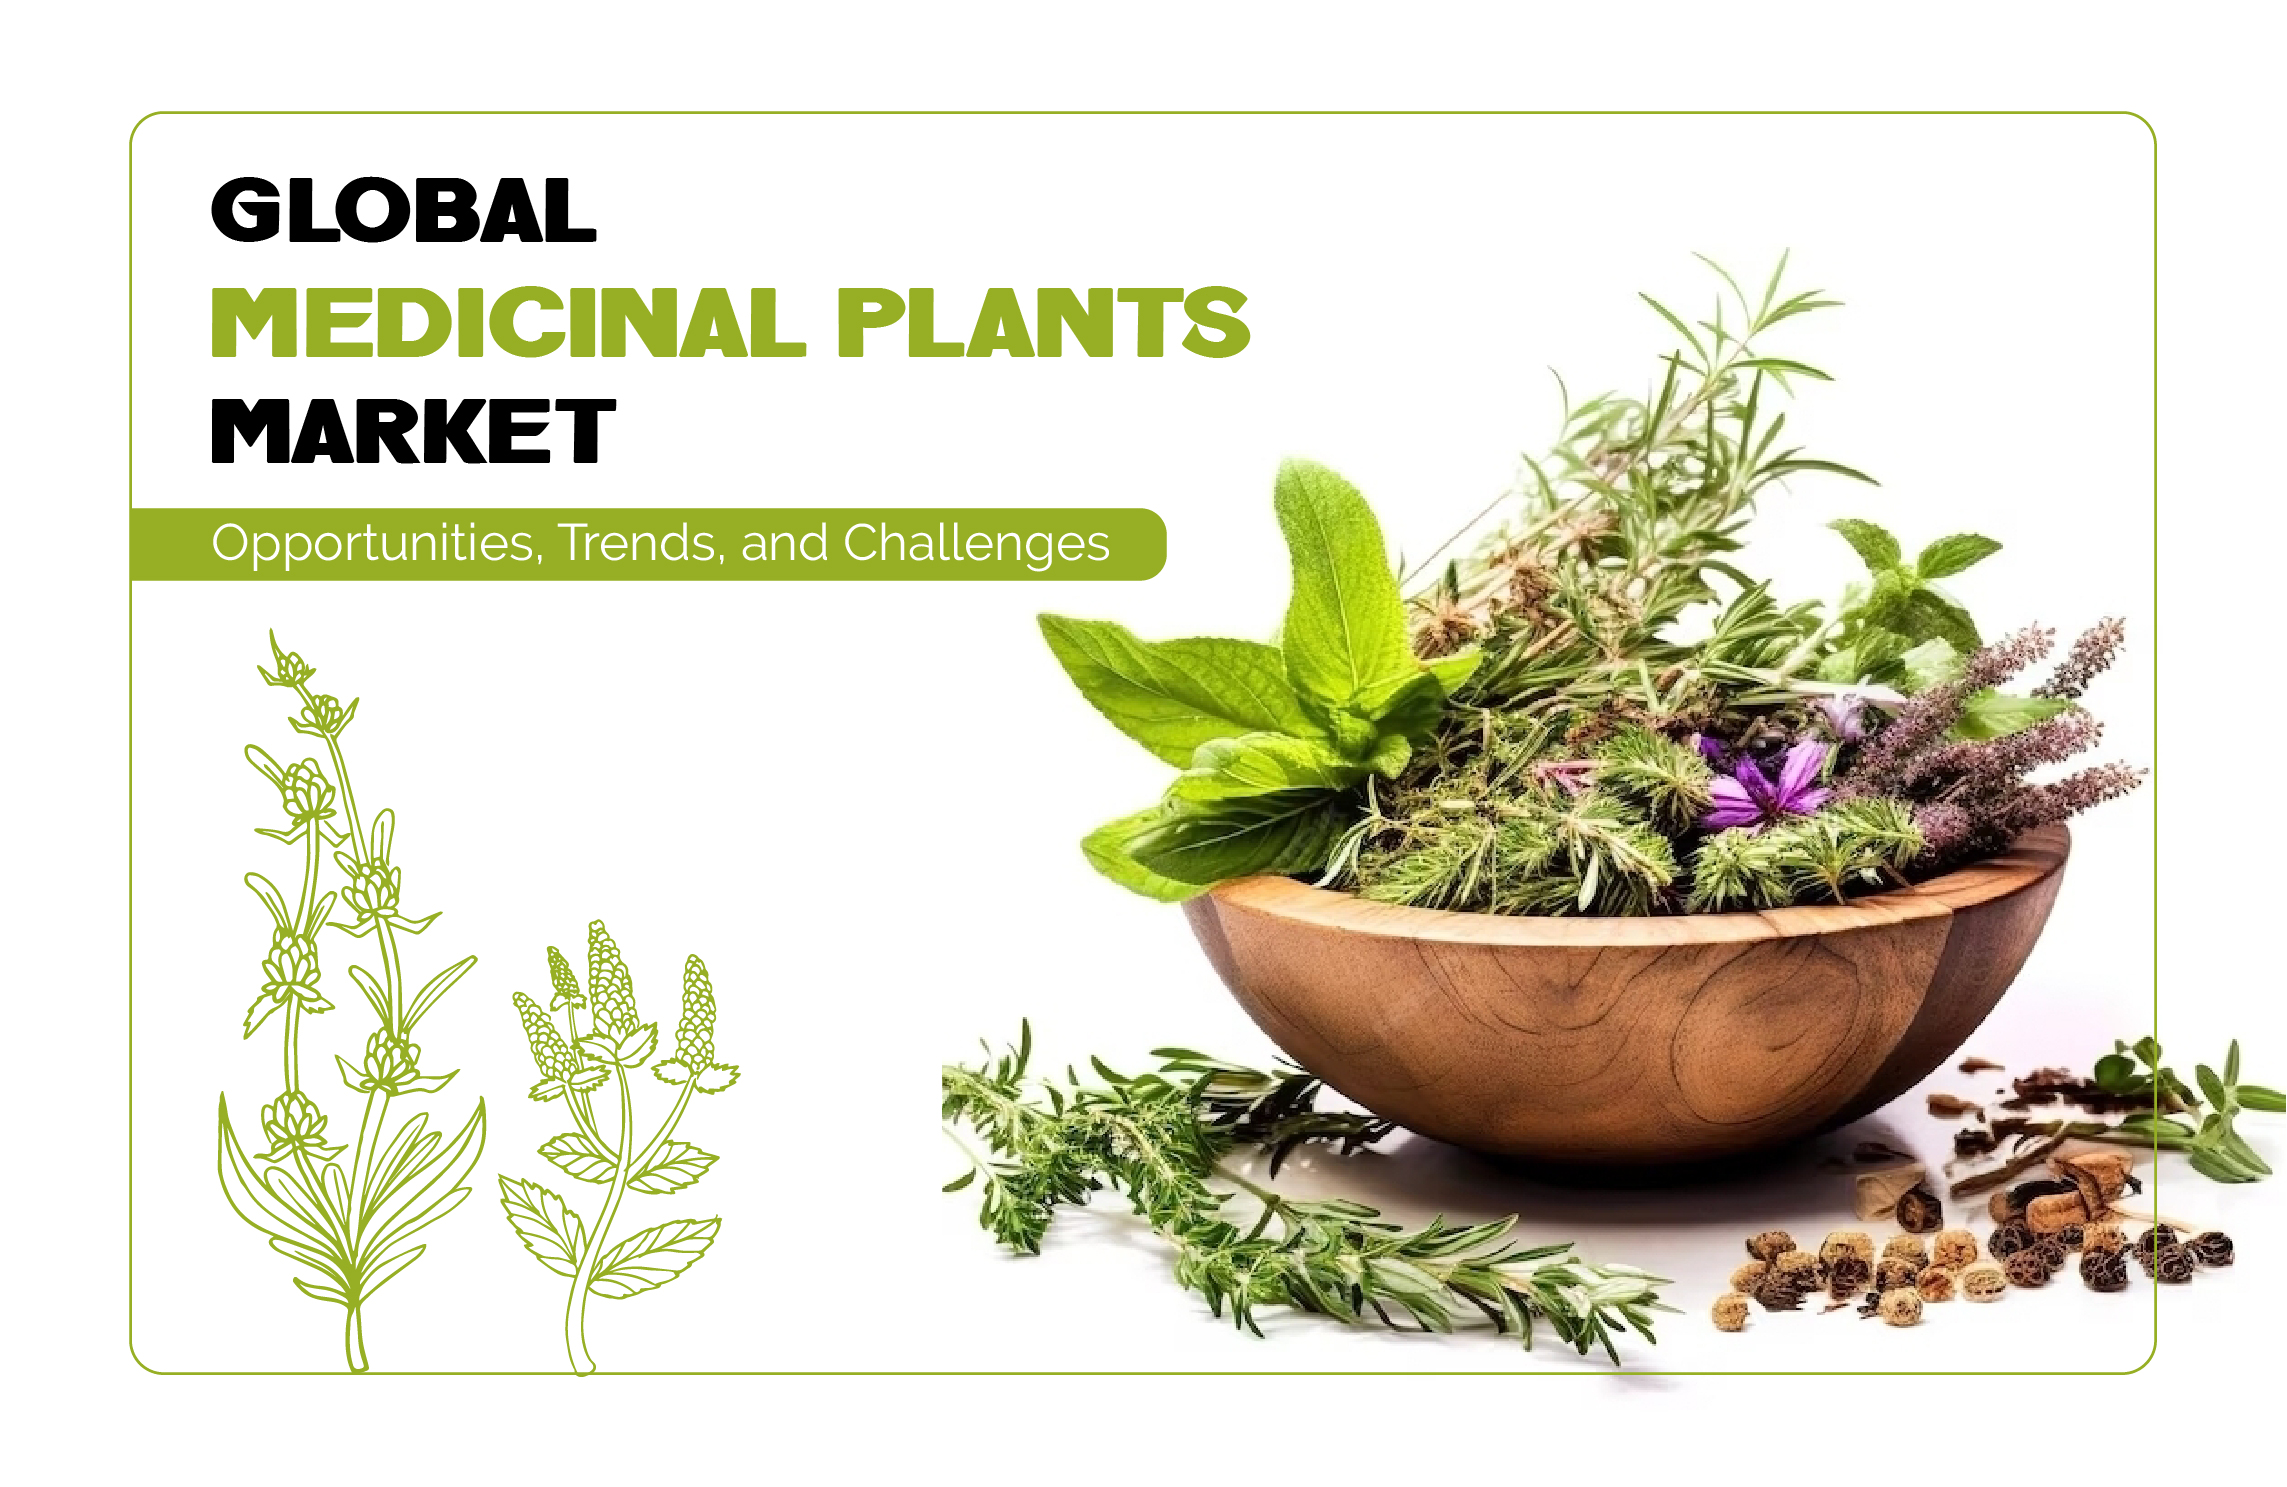 Global Medicinal Plants Market: Opportunities, Trends, and Challenges